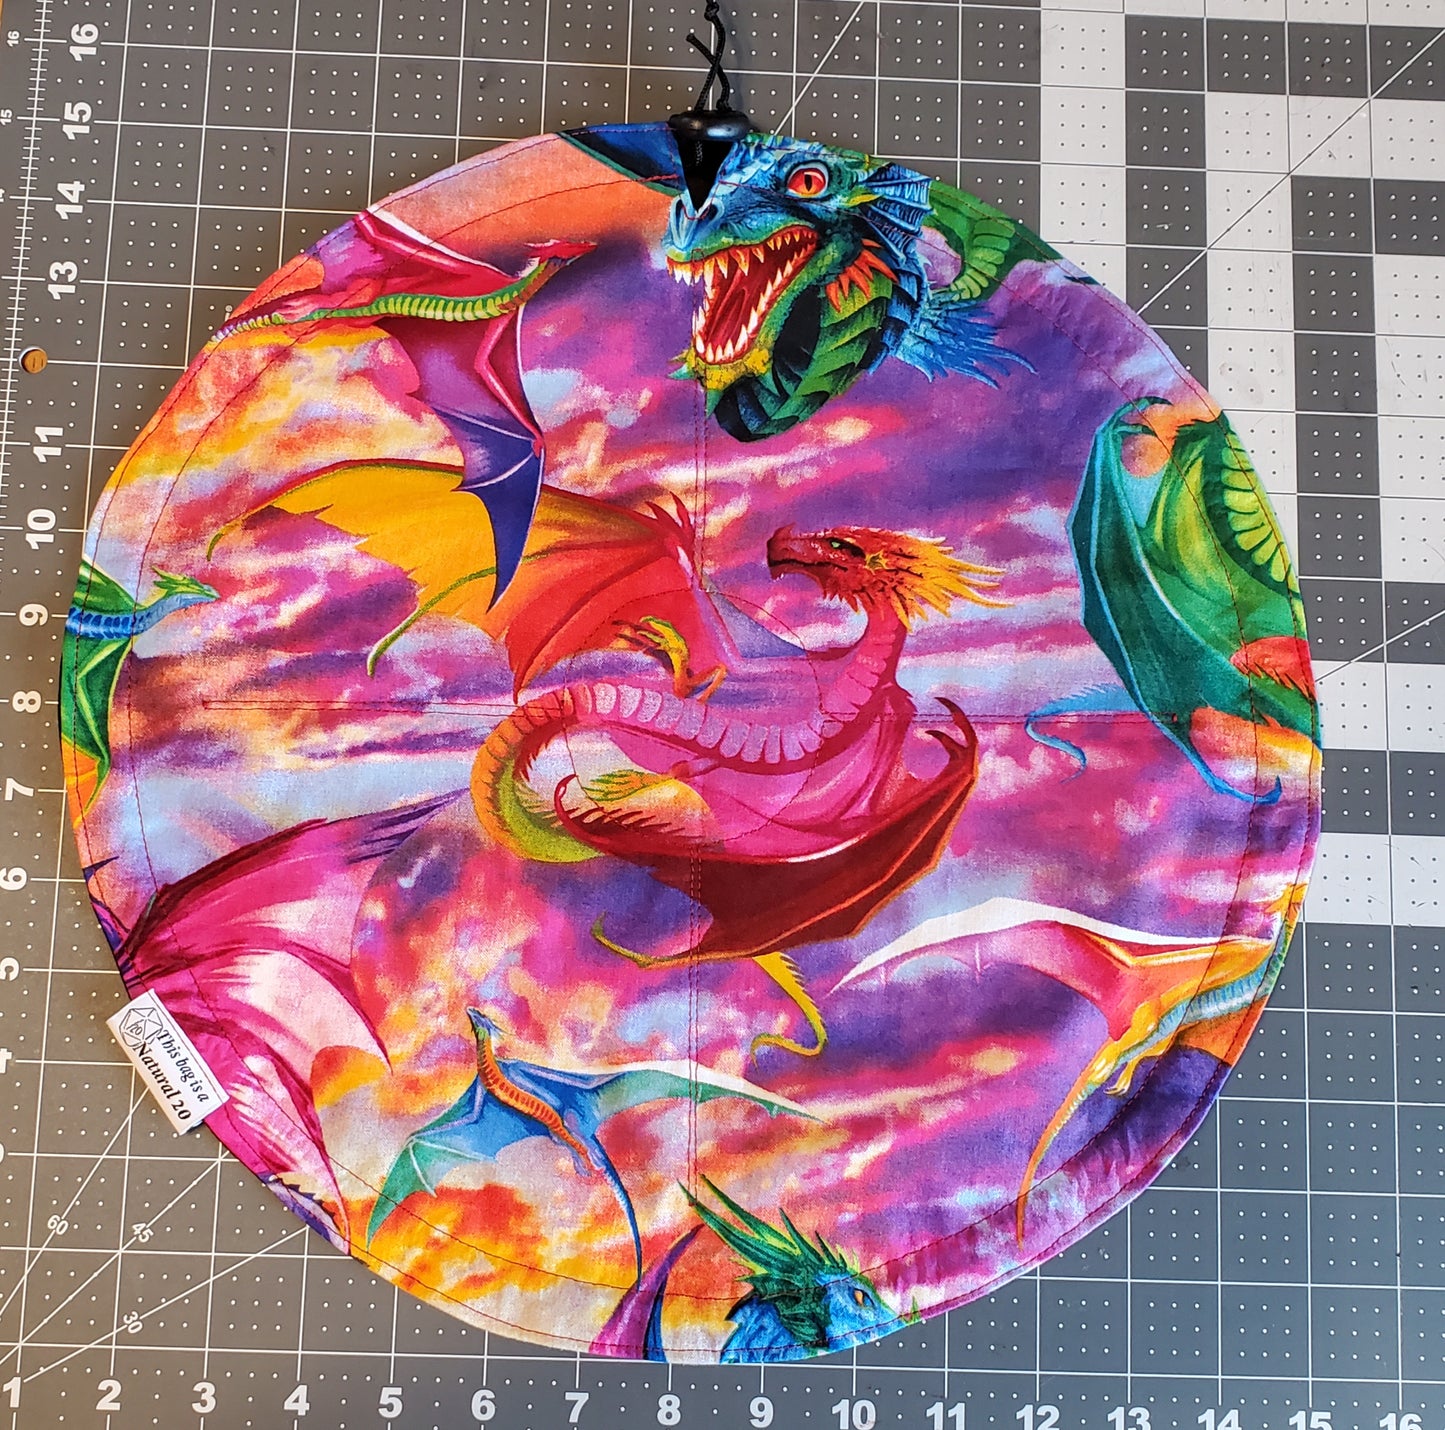 Handmade Watercolor Dragon Dice Bag / Portable Tray in one! 7 pc dice set INCLUDED!